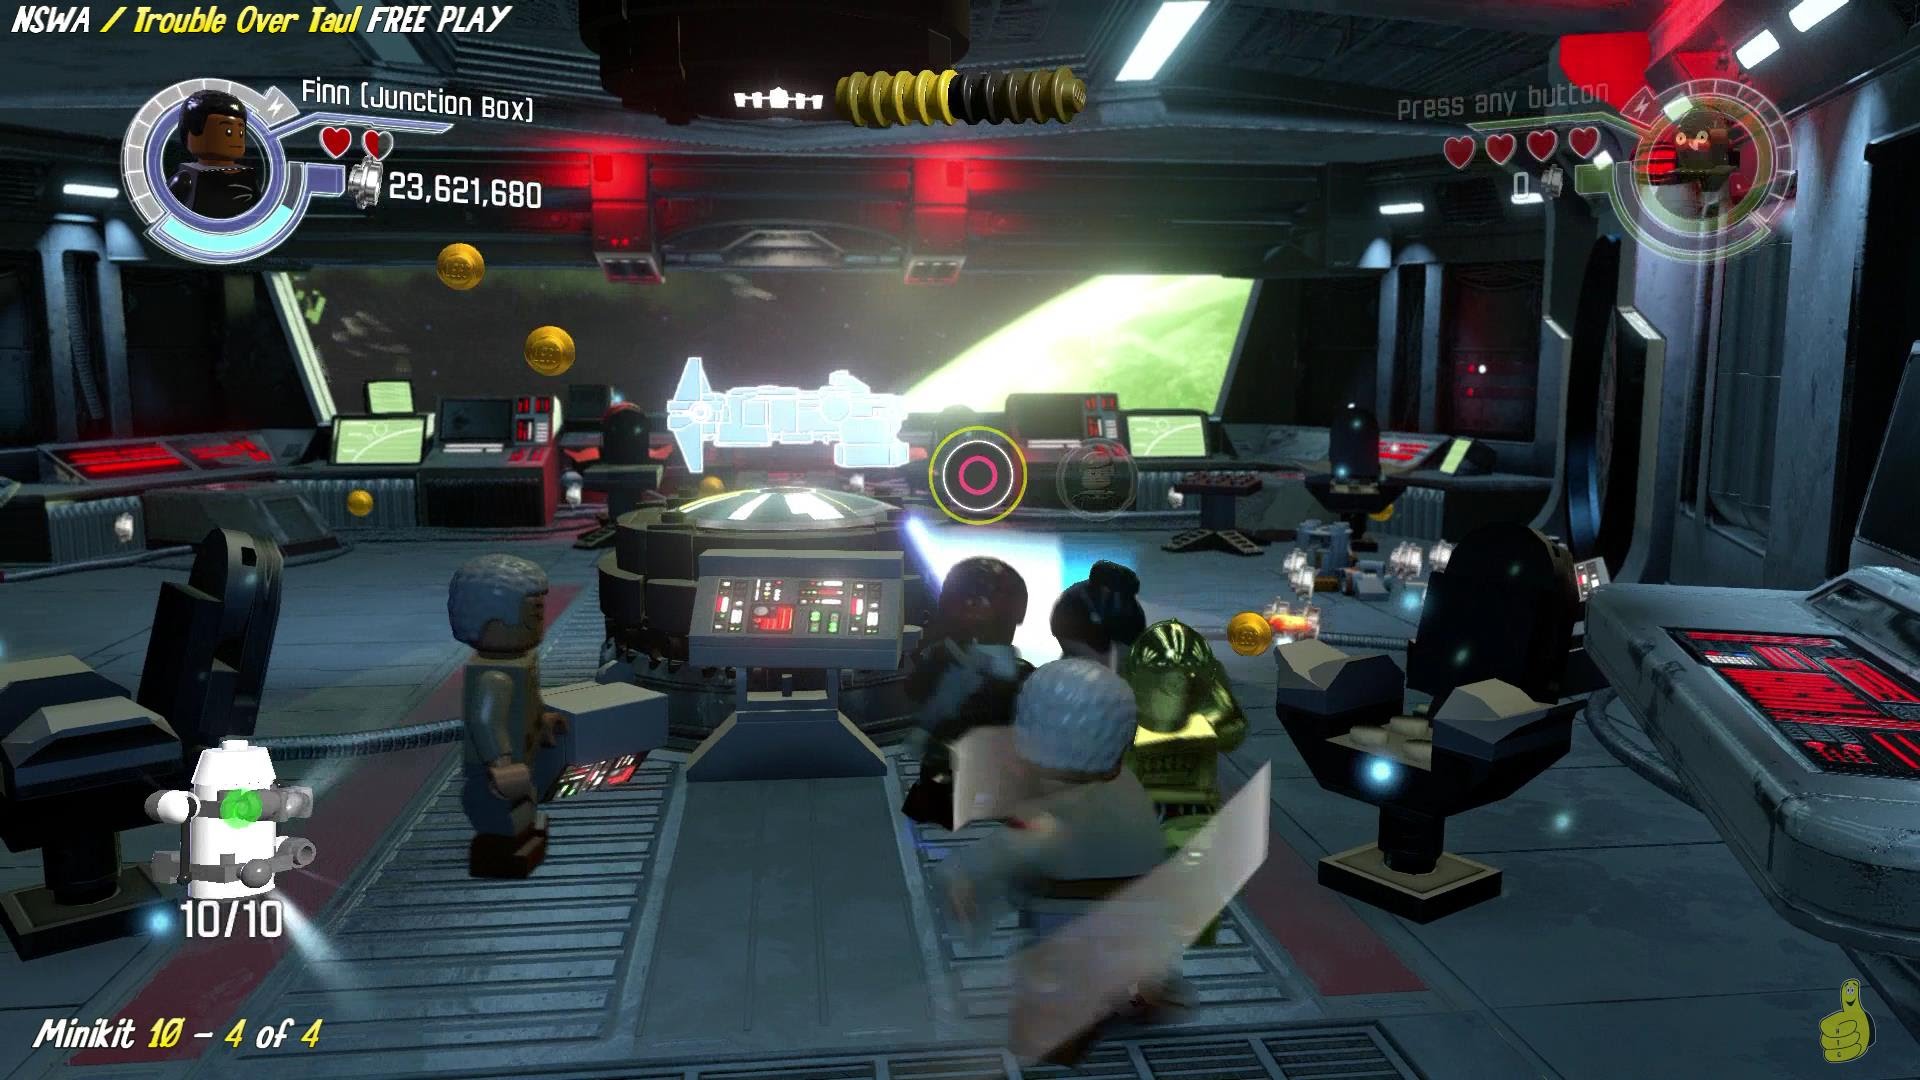 Lego Star Wars The Force Awakens: NSWA / Trouble Over Taul FREE PLAY (All Minikits & Red Brick)- HTG